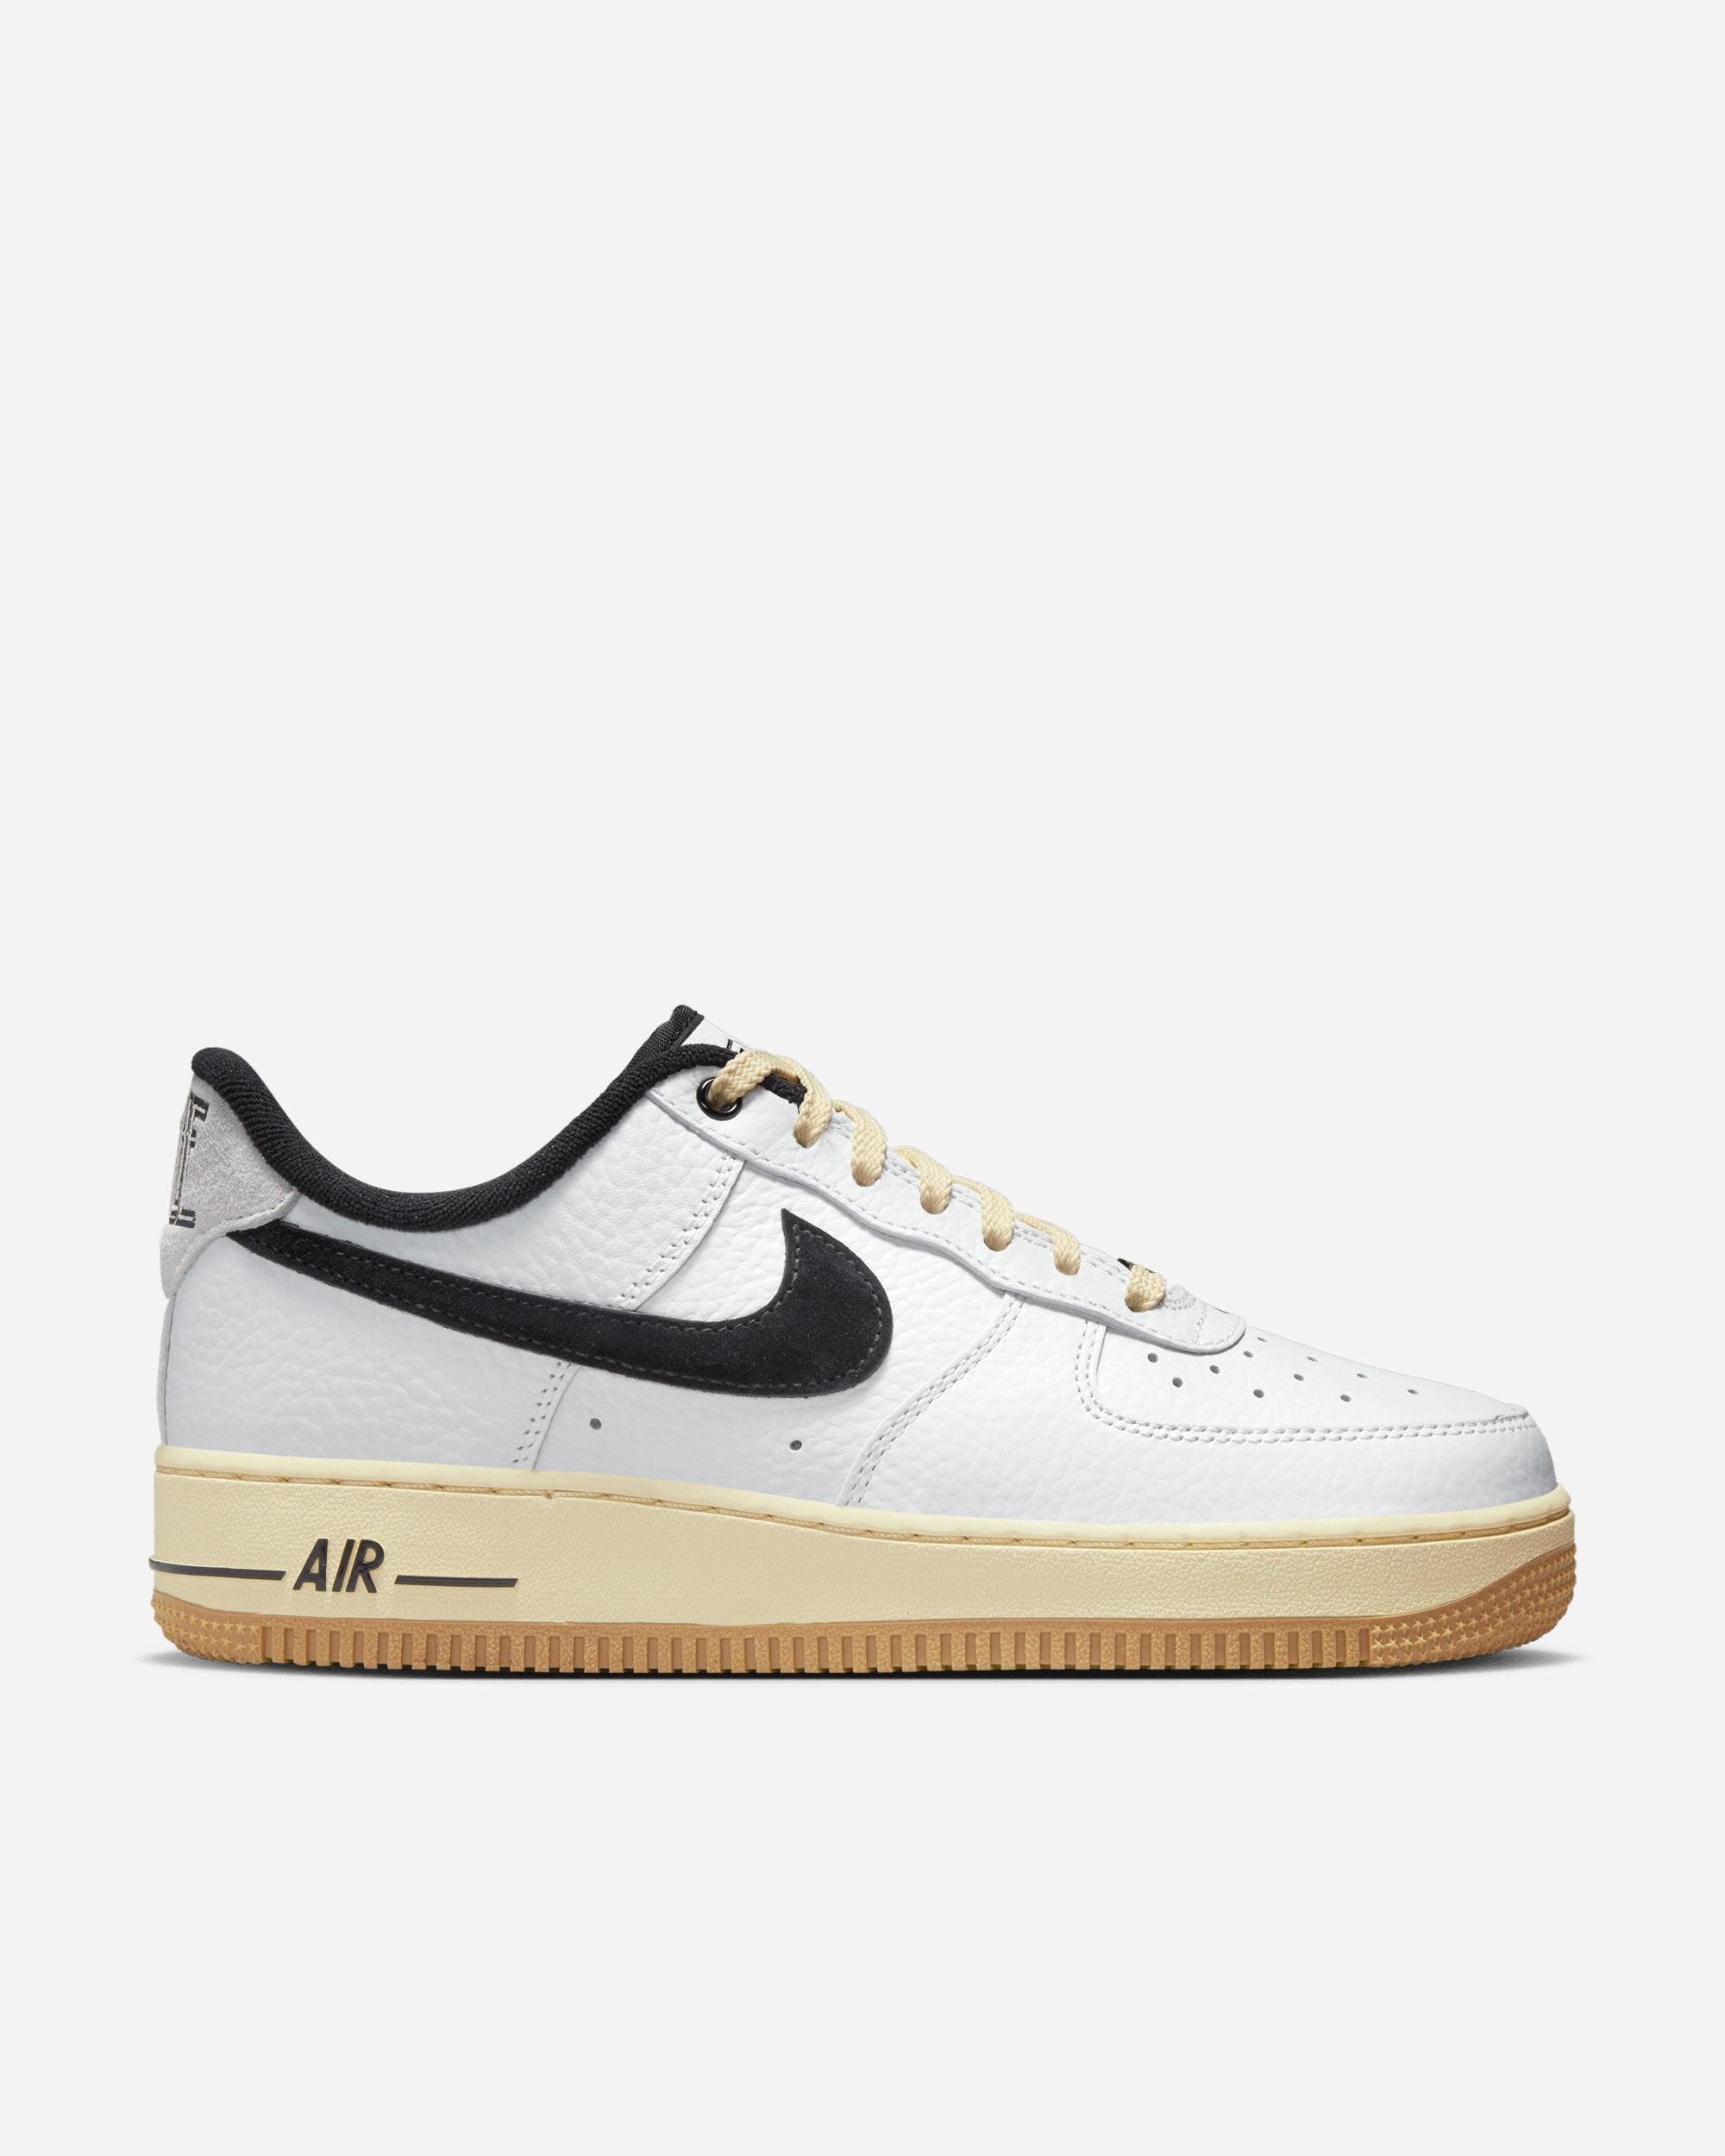 Nike Air Force 1'07 'Command Force' SUMMIT WHITE/BLACK-MUSLIN DR0148-101